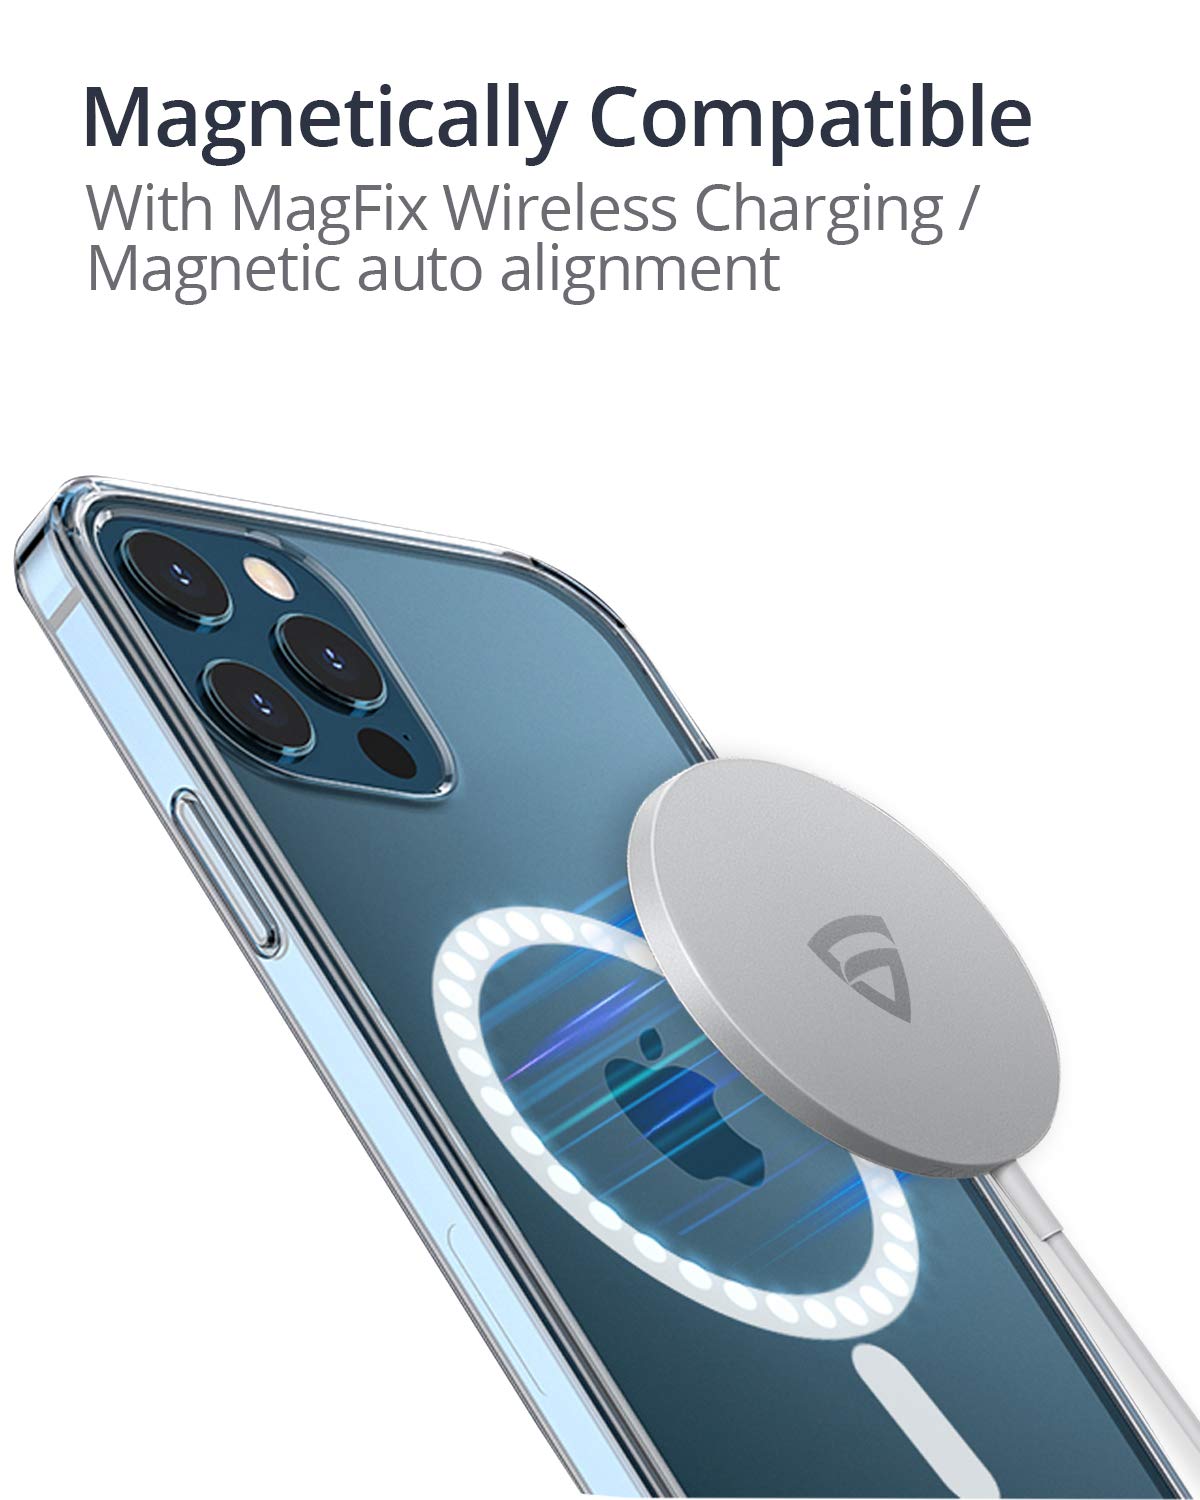 RAEGR iPhone 12 Pro Max 5G MagFix Magnetic Case, Supports Mag-Safe Wireless Charging 6.7